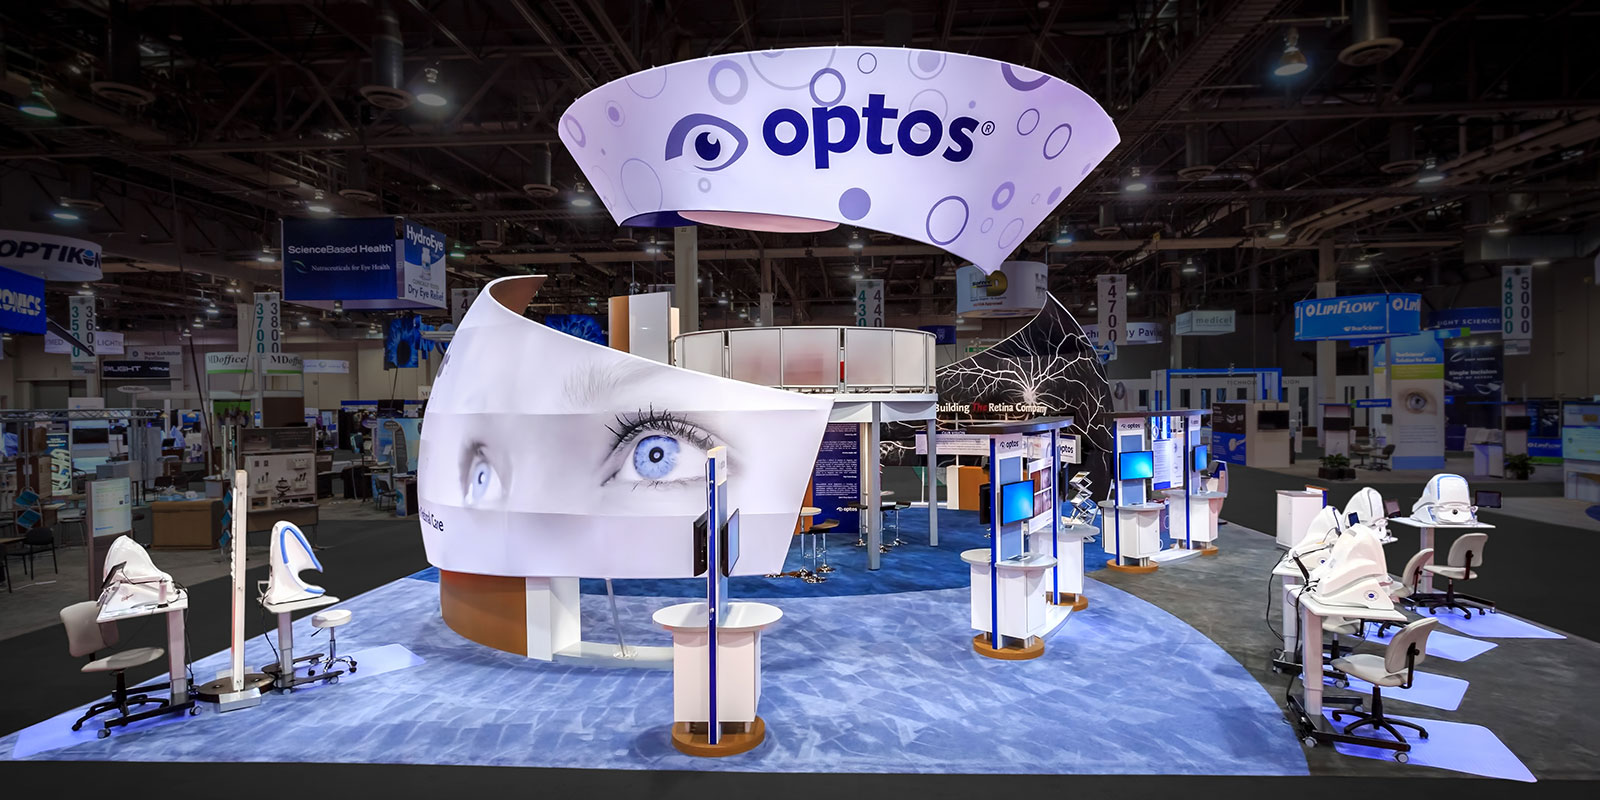 Hill & Partners Custom Branded Environment for Optos